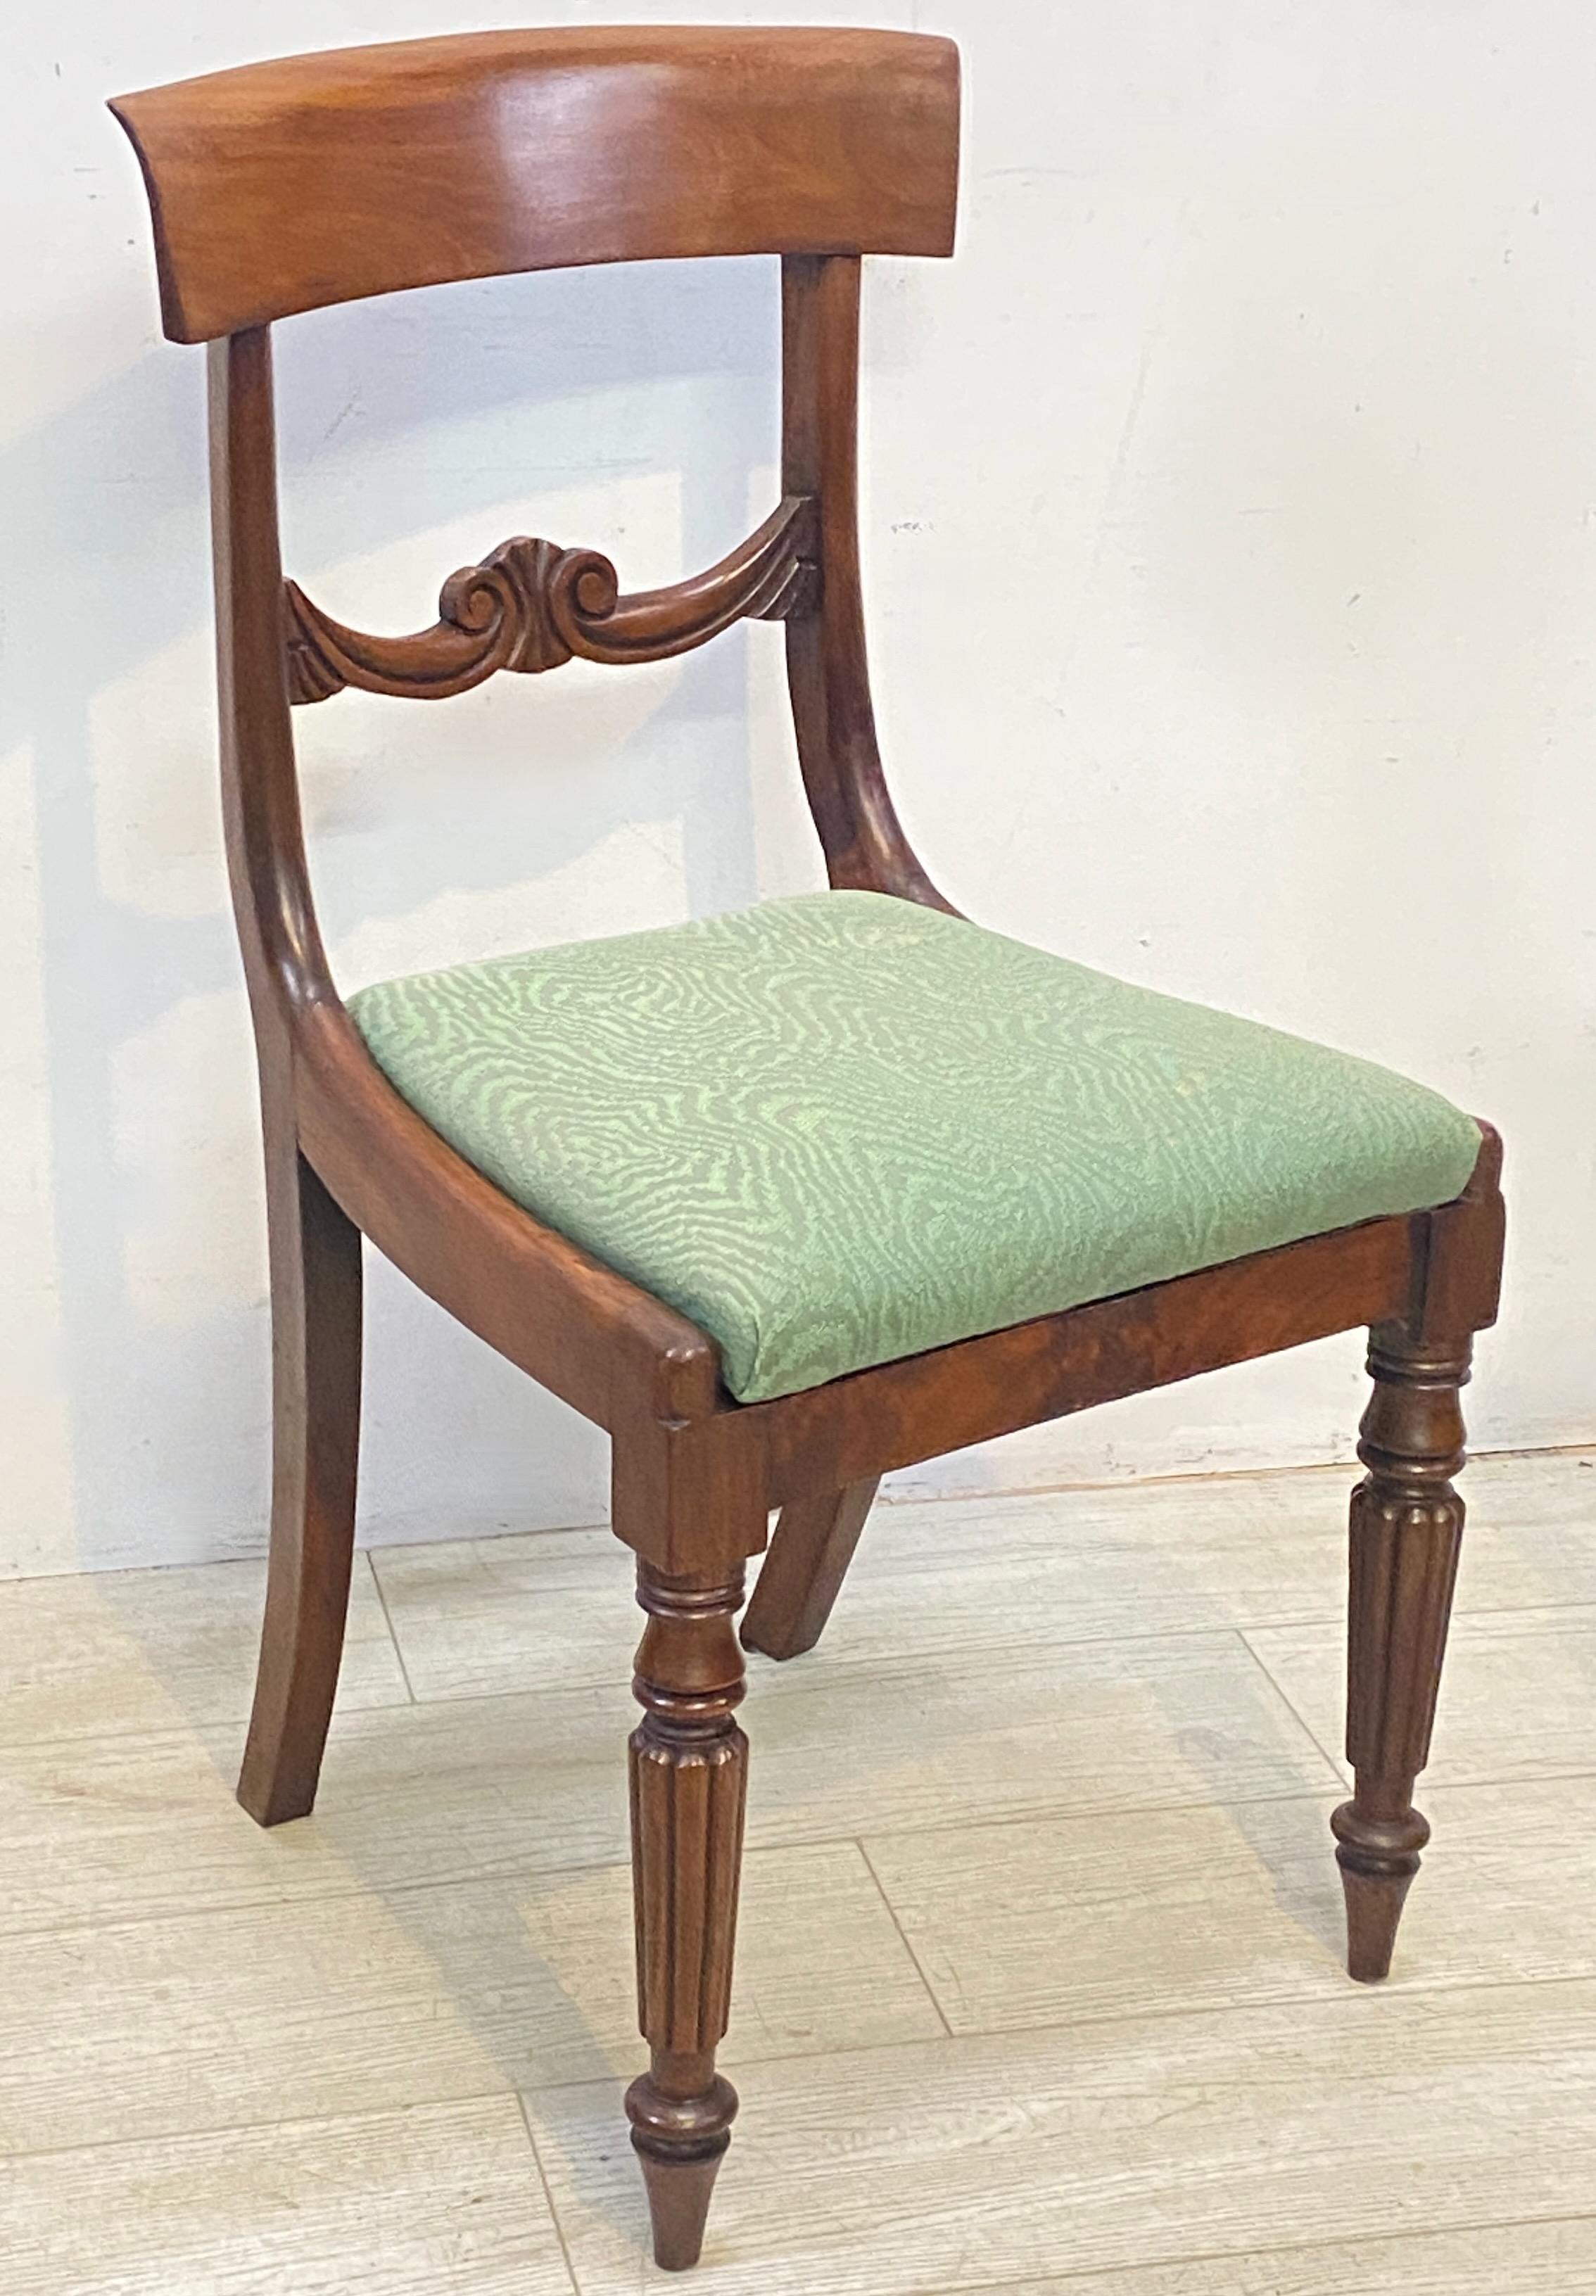 19th Century English George IV Mahogany Regency Dining Chairs, Set of Six For Sale 3